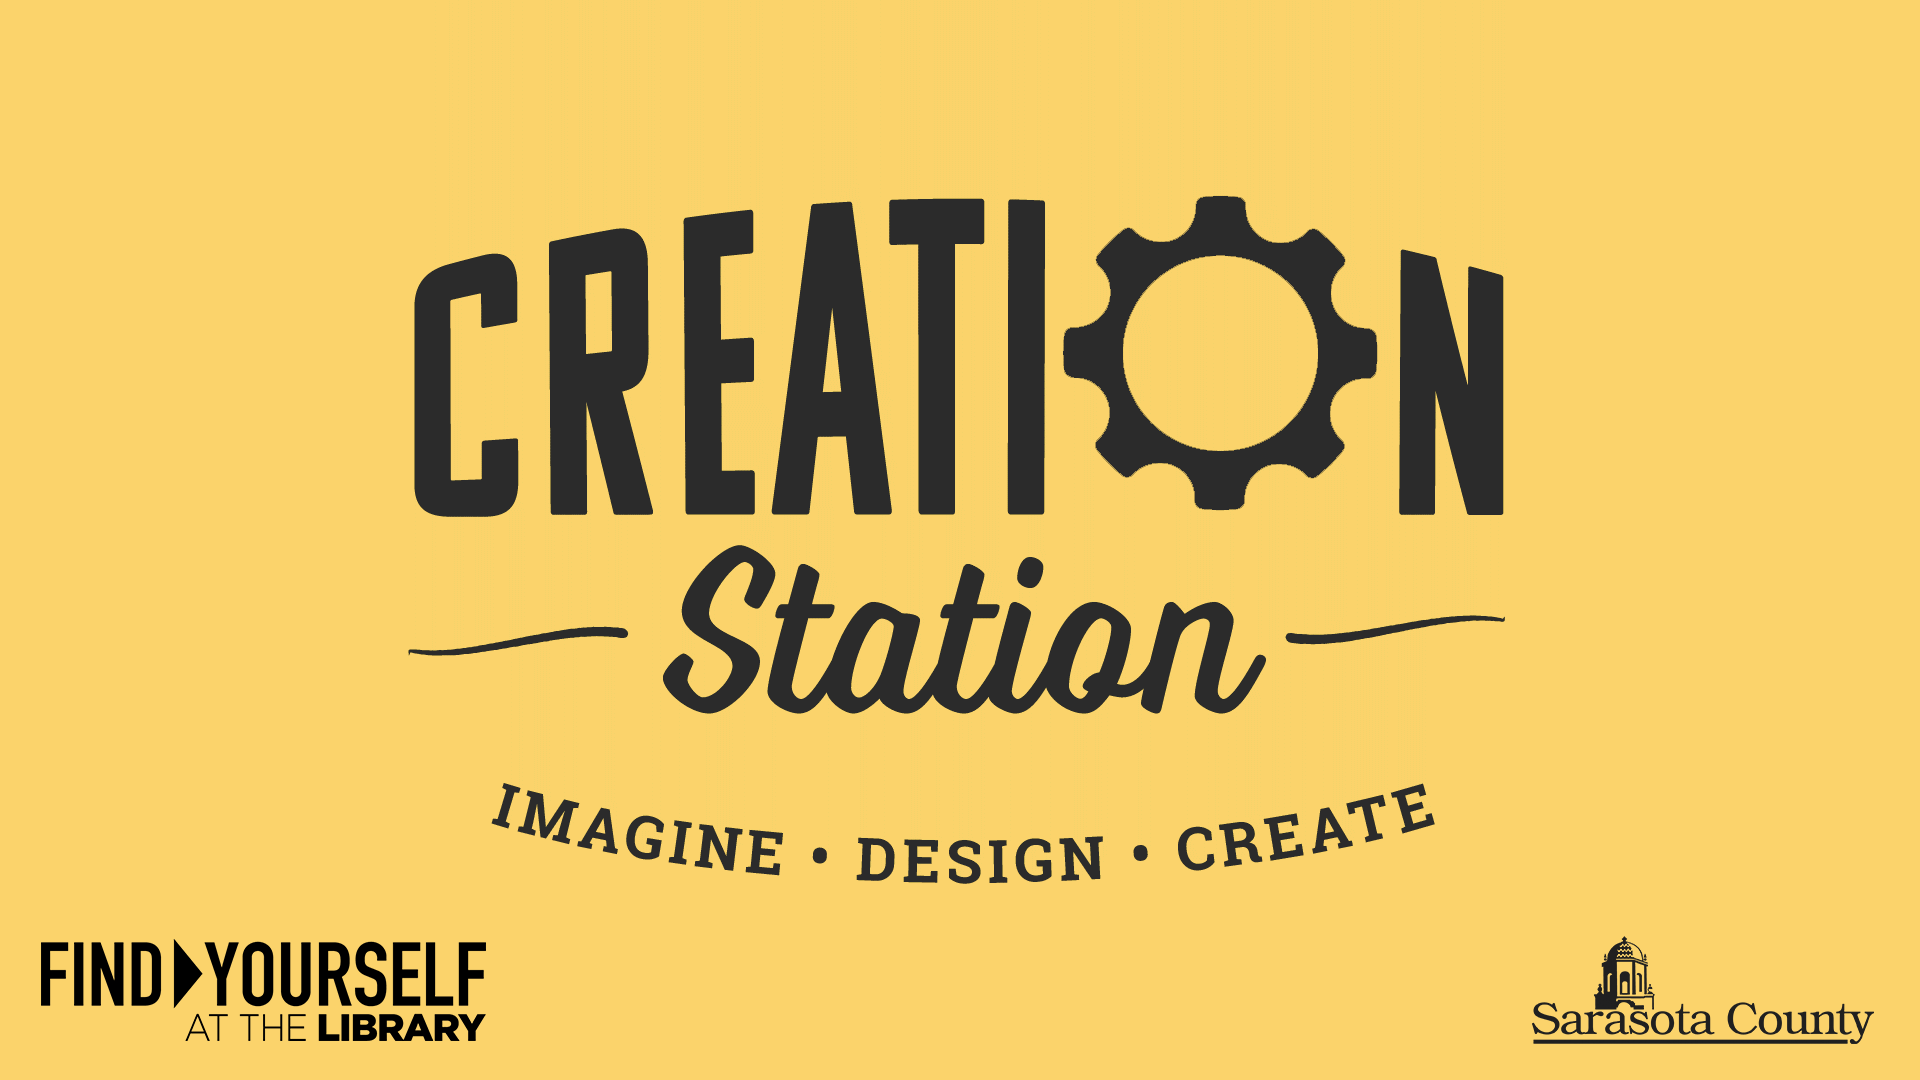 Creation Station logo on a yellow background